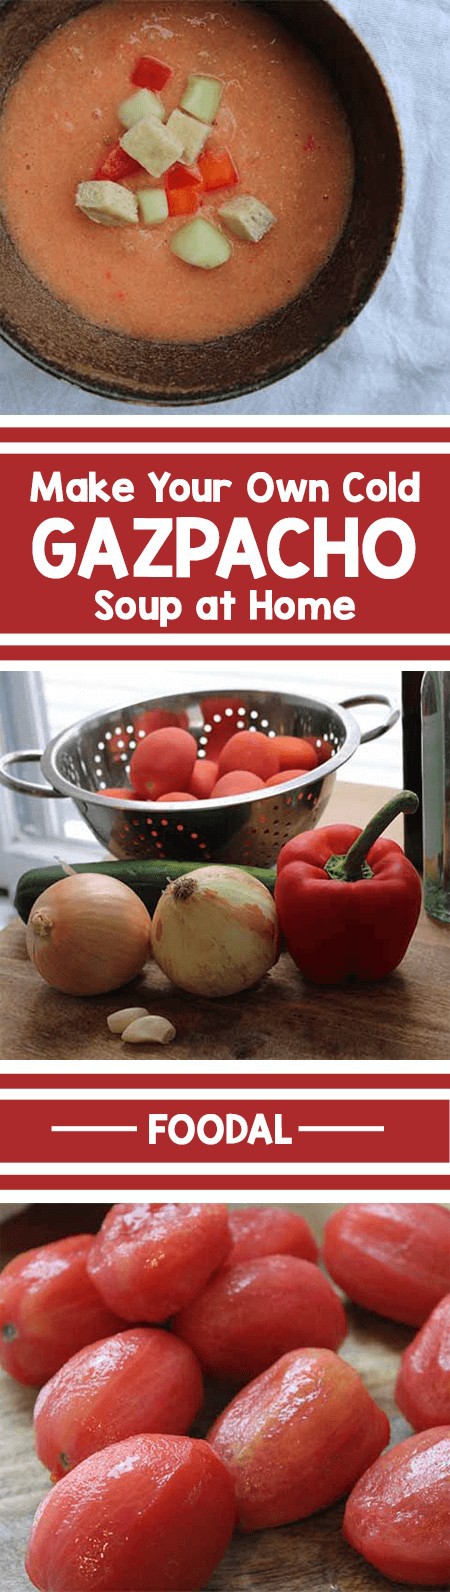 Gazpacho: It's like a whole garden blended into a single bite. While many takes on this chilled soup exist, we prefer the classic red variety. Fresh tomatoes, cucumbers, onions, and red peppers are combined for a dish bursting with vibrant flavors. Day-old bread adds extra body, and helps eliminate kitchen waste! Give it a try today. https://foodal.com/recipes/soups/traditional-gazpacho/